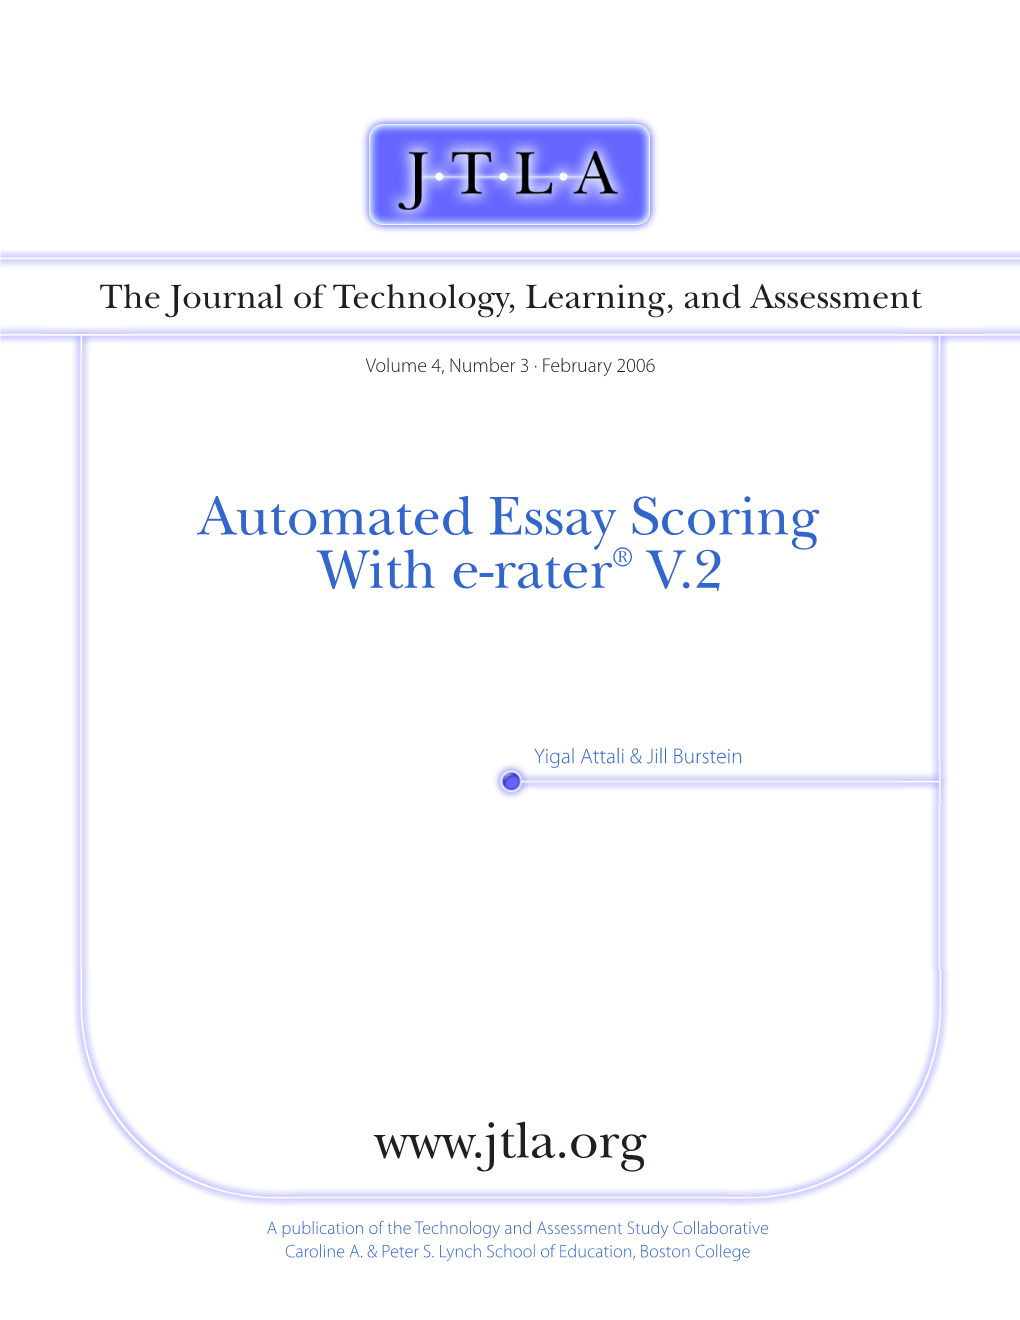 Automated Essay Scoring with E-Rater® V.2